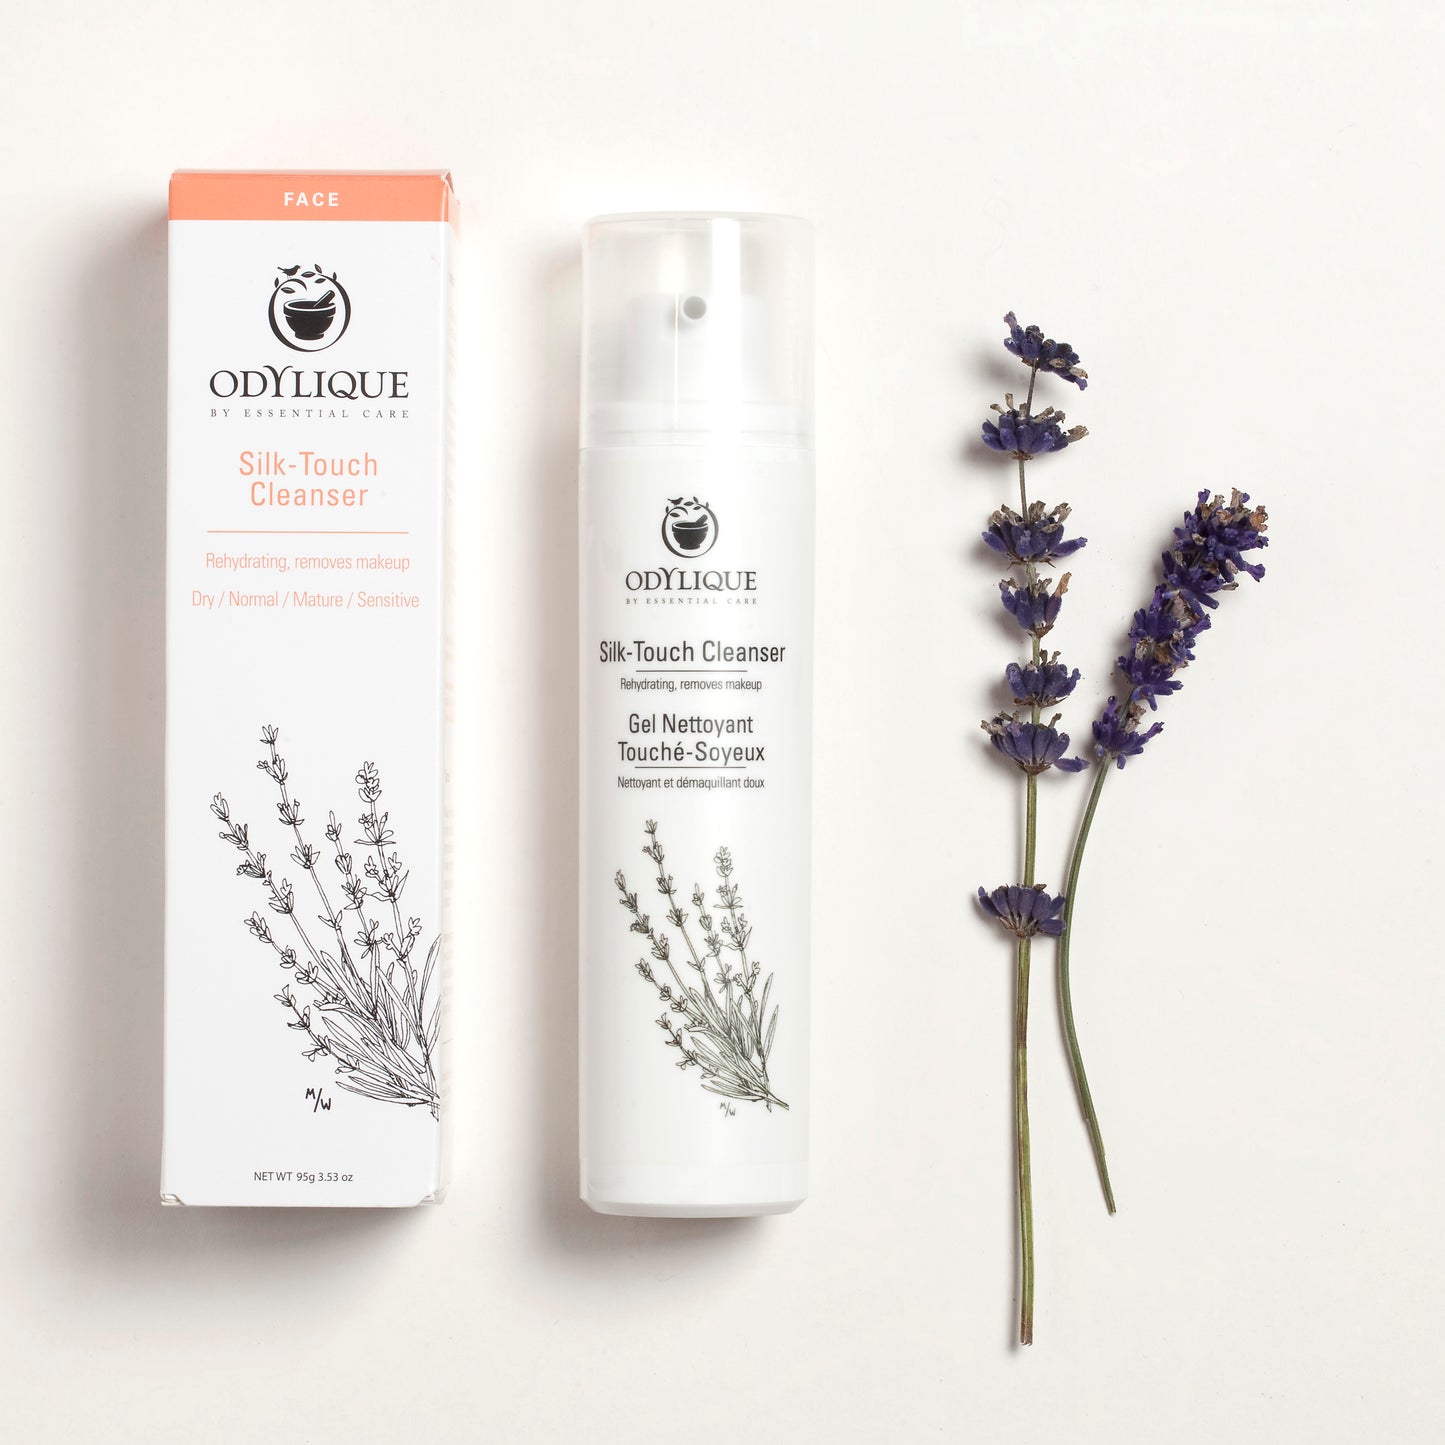 box and bottle of the odylique silk touch cleanser laid flat next to a frond of lavender which is in the formulation of this natural cleanser